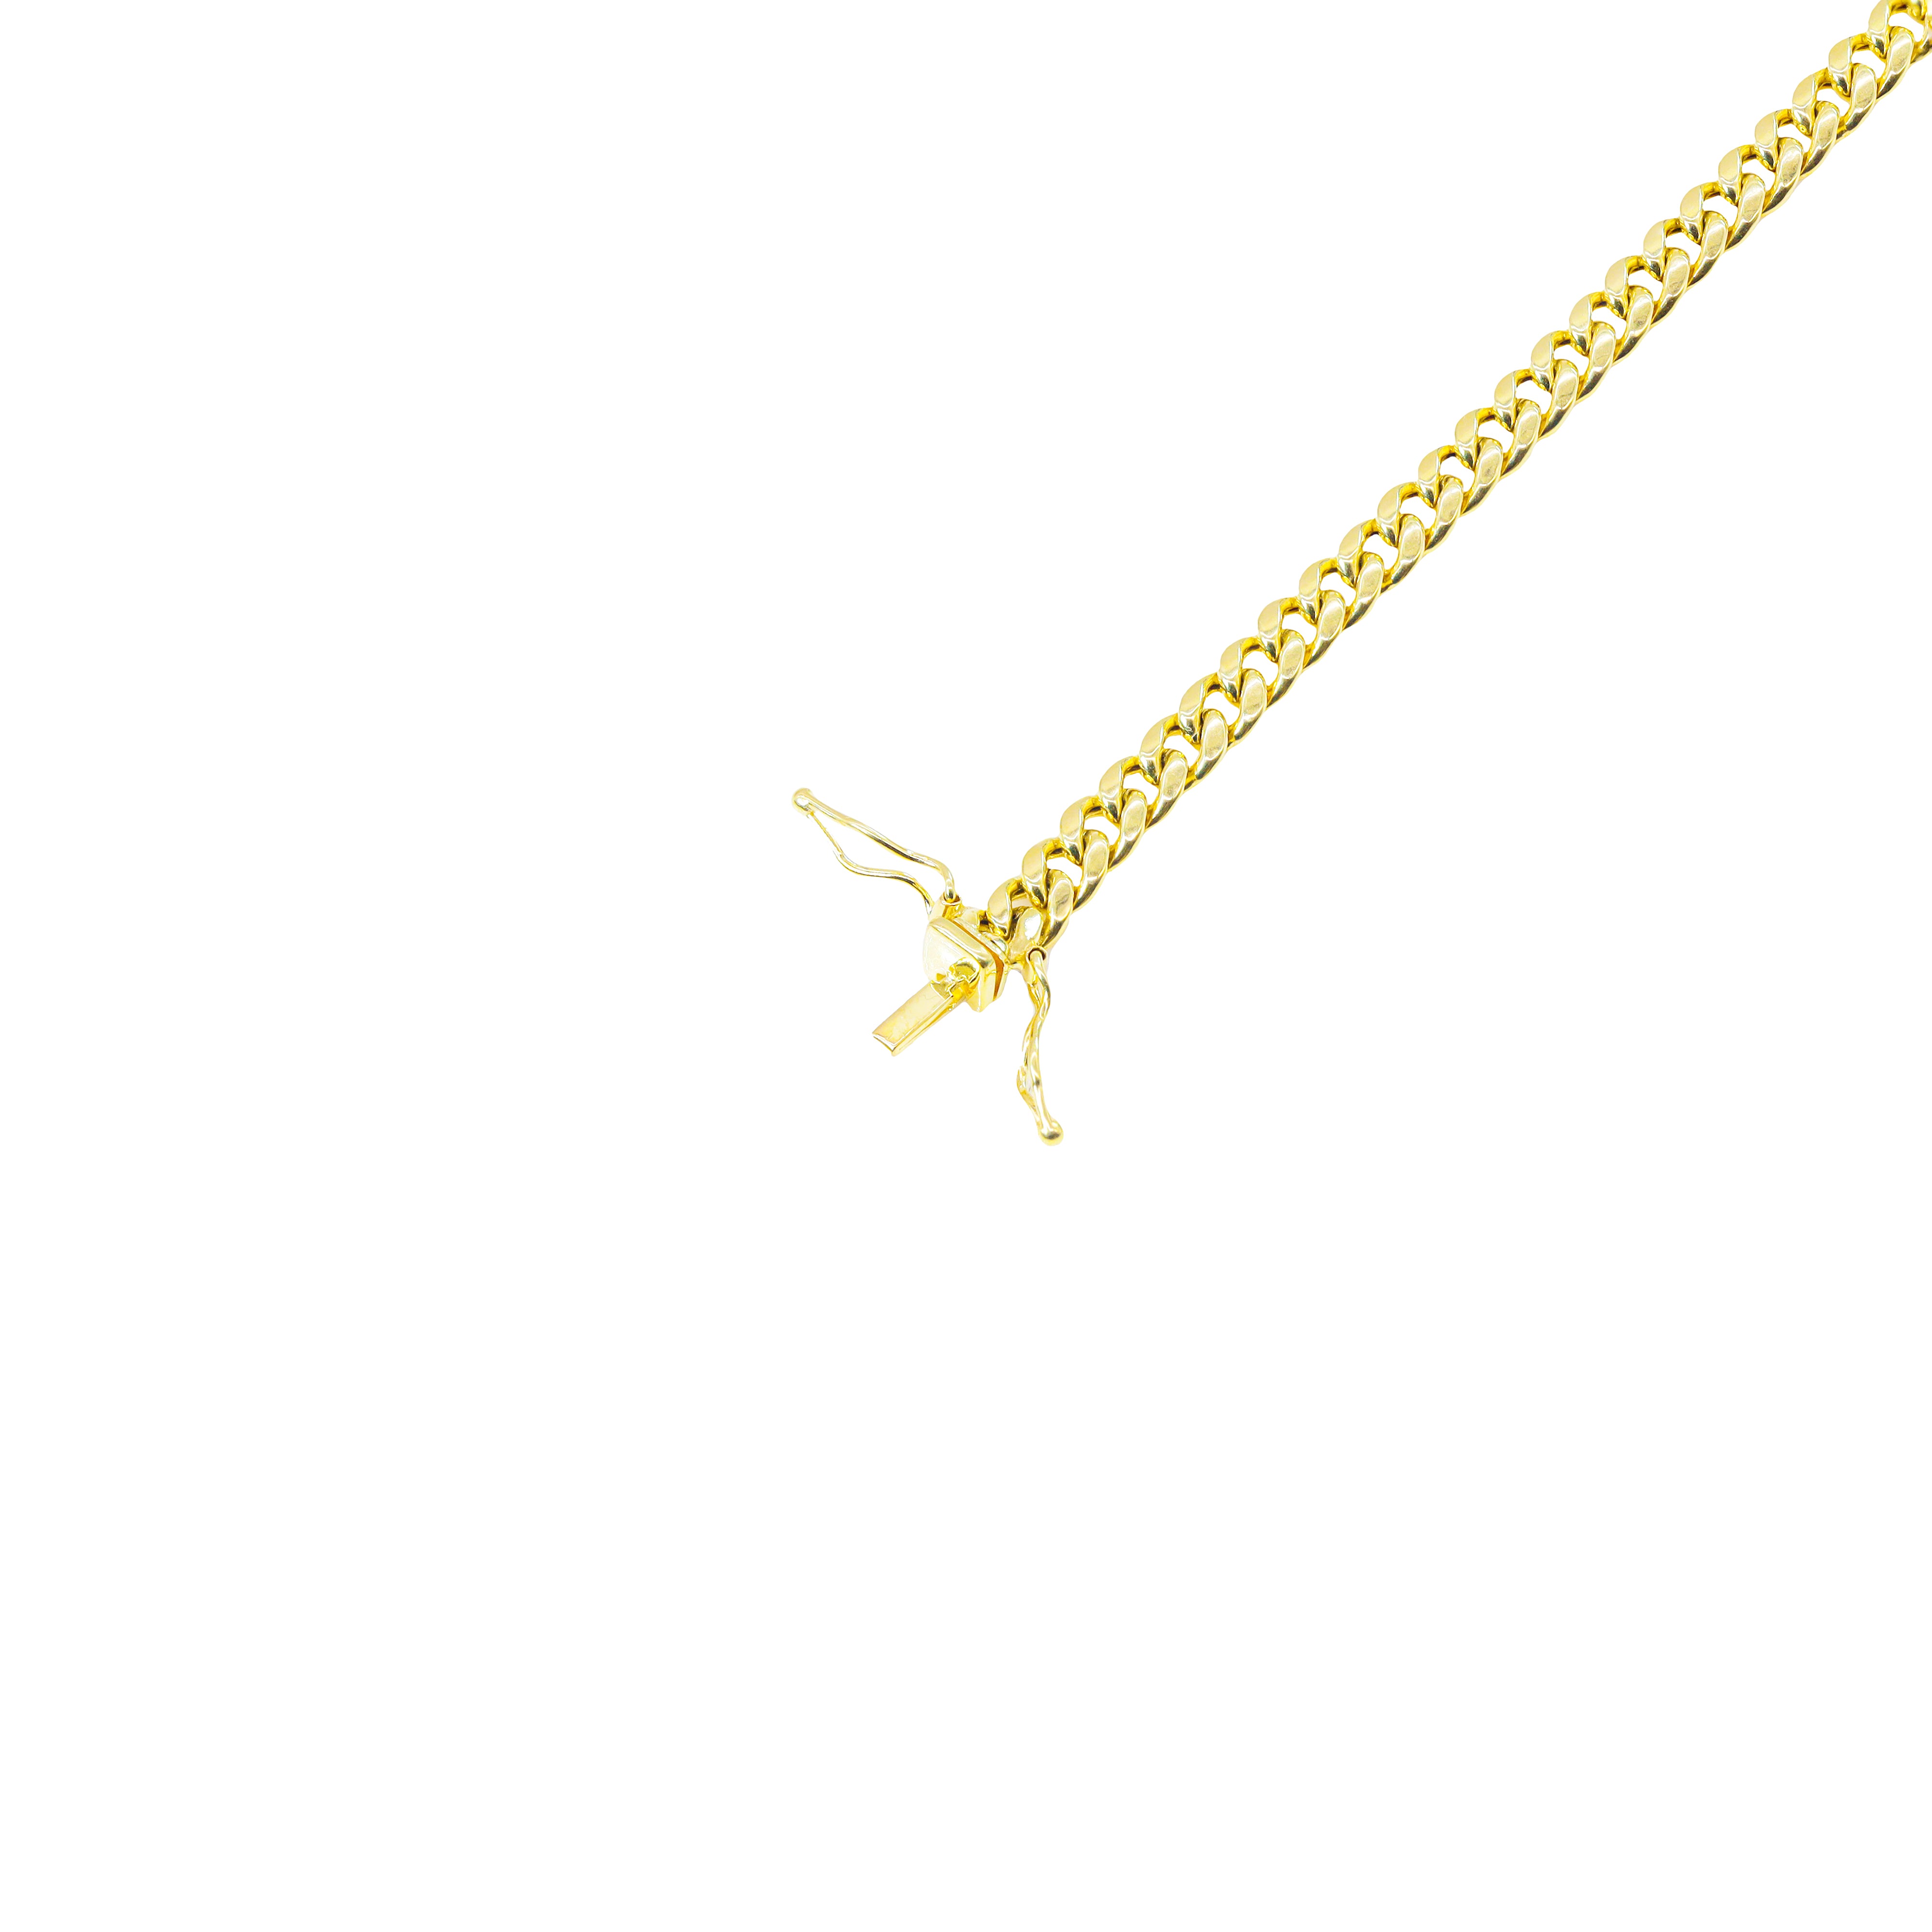 10KT Solid Miami Cuban Link Yellow Gold Chain